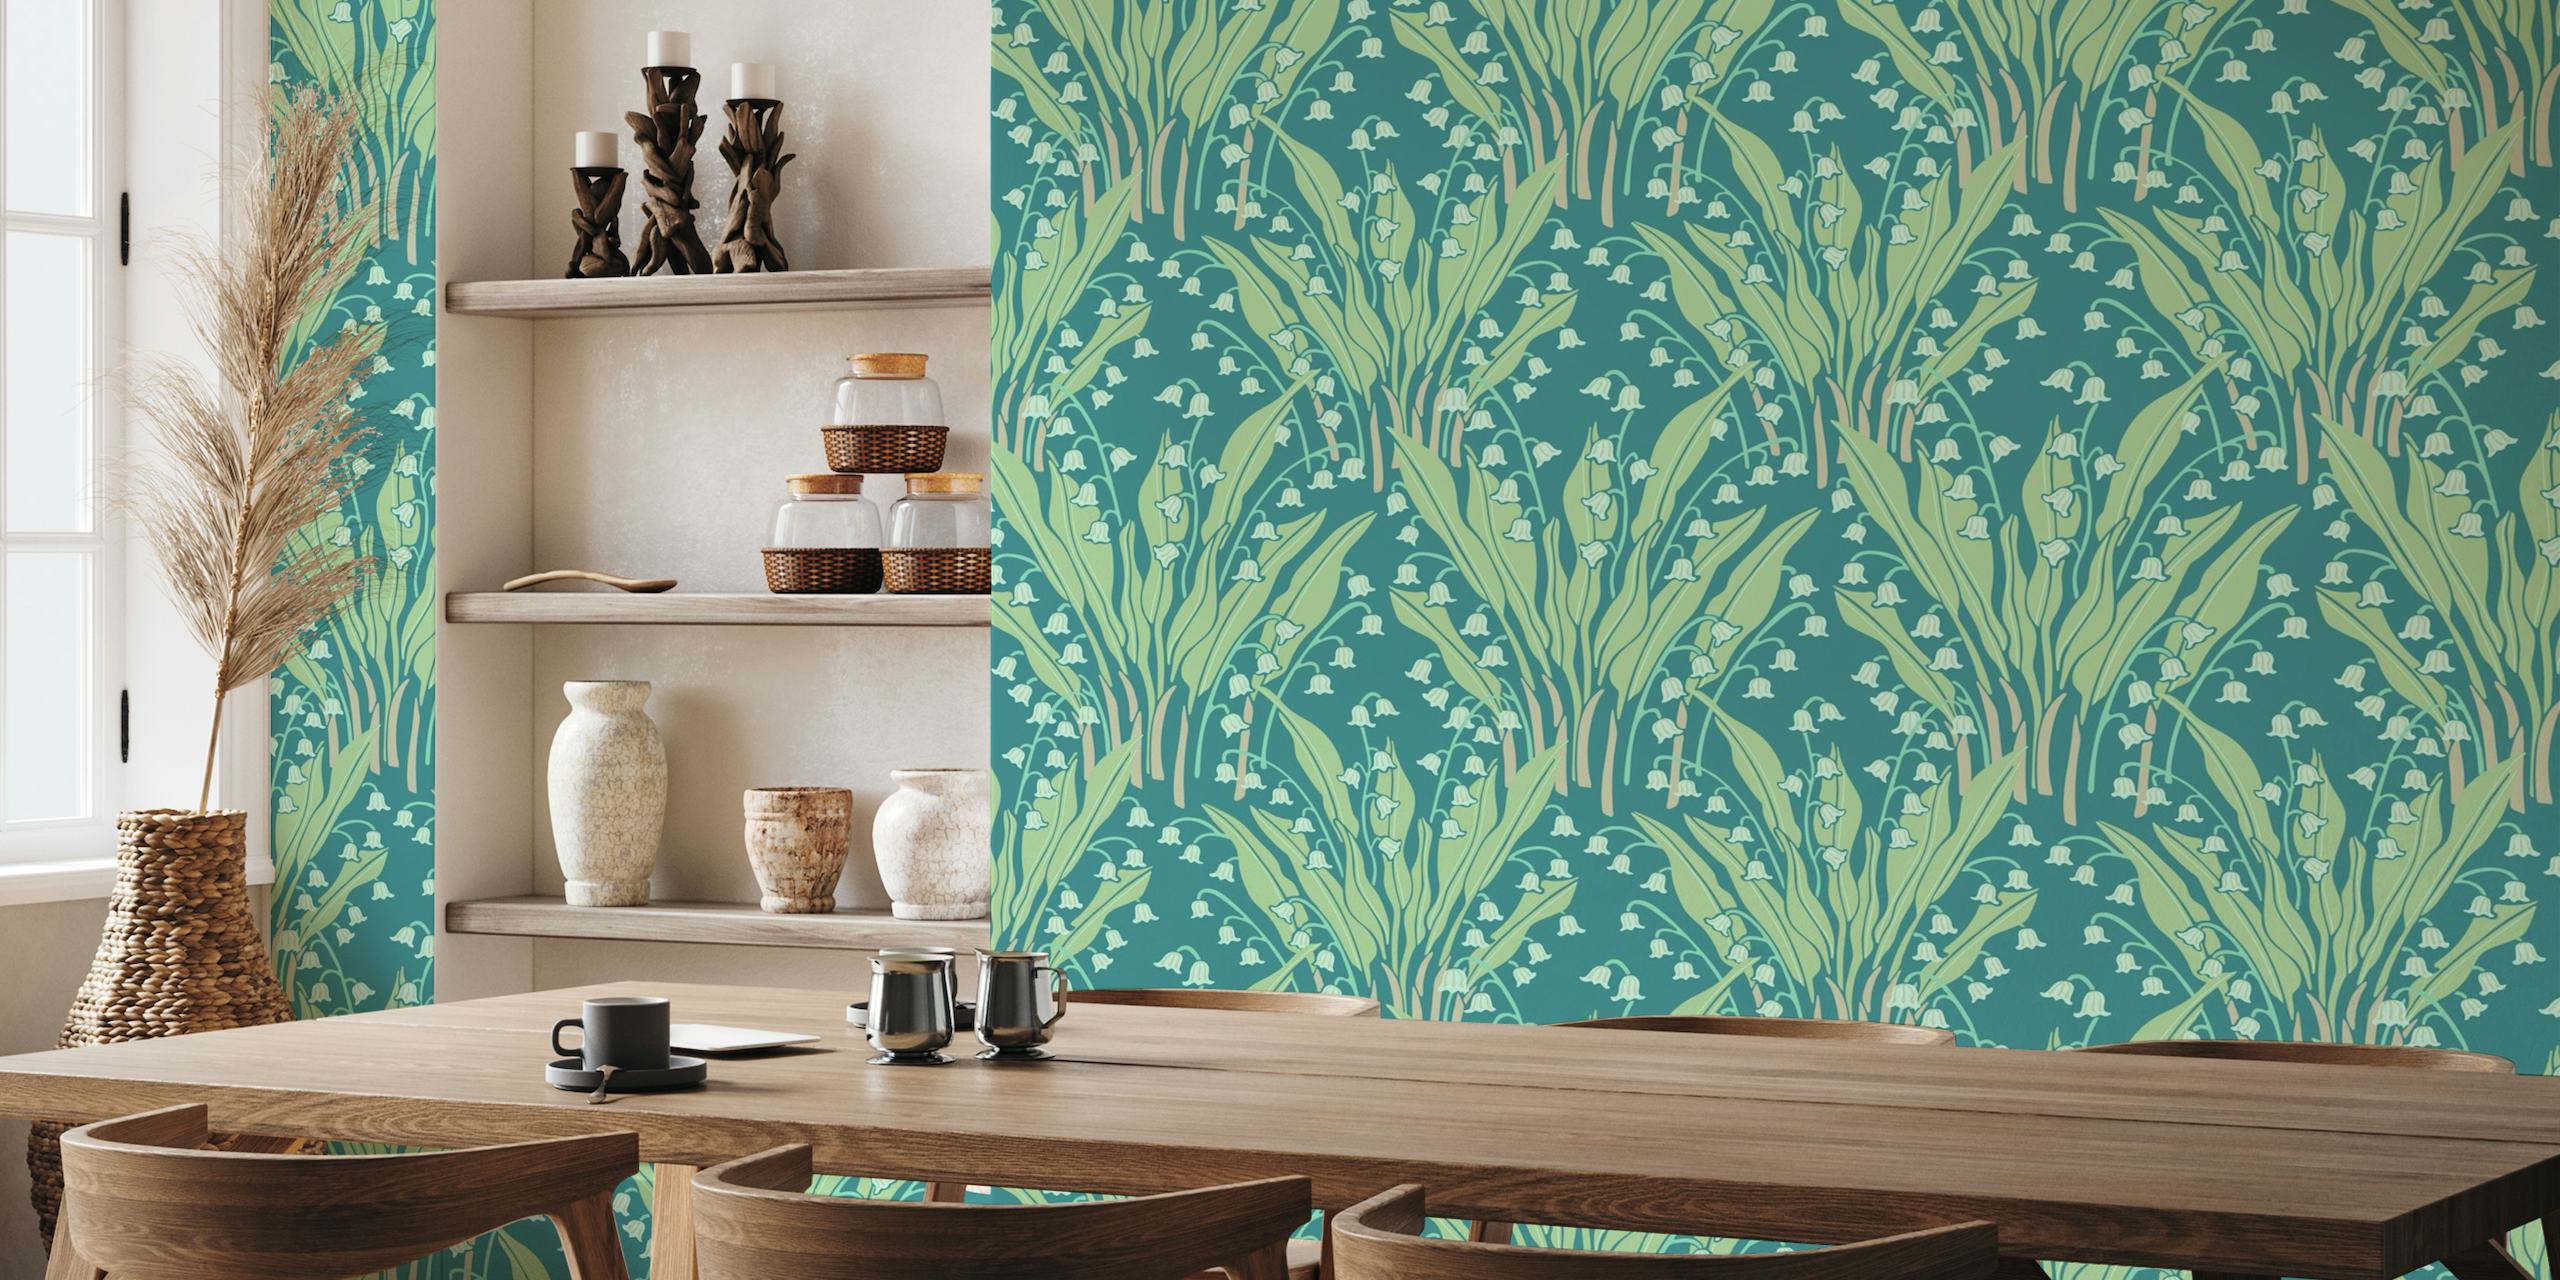 LILY OF THE VALLEY Floral - Teal wallpaper